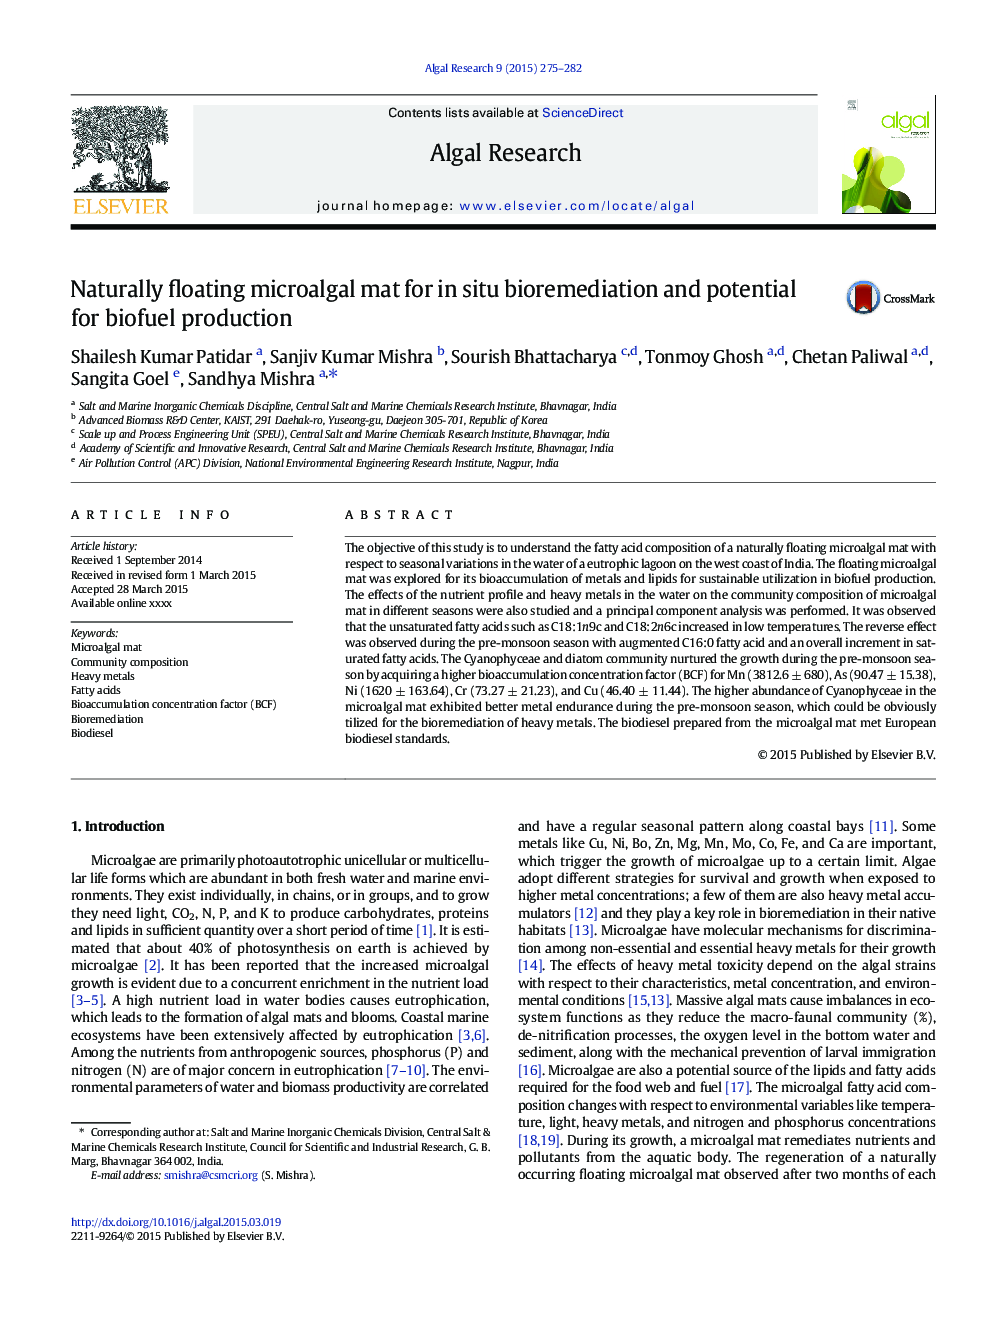 Naturally floating microalgal mat for in situ bioremediation and potential for biofuel production